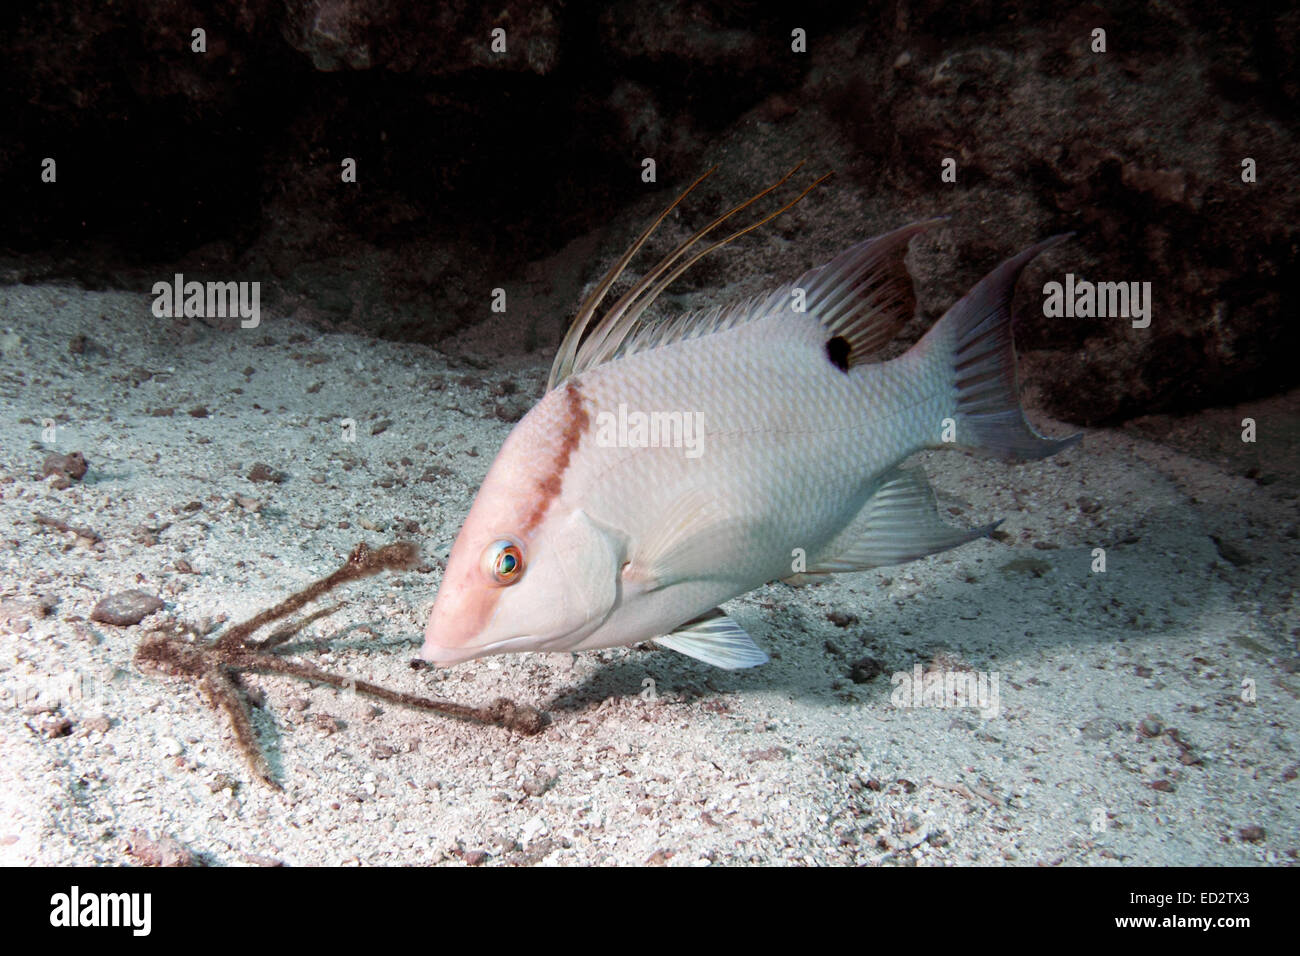 A Hogfish hovers above the sandy bottom of the Florida Keys National Marine Sanctuary. Stock Photo